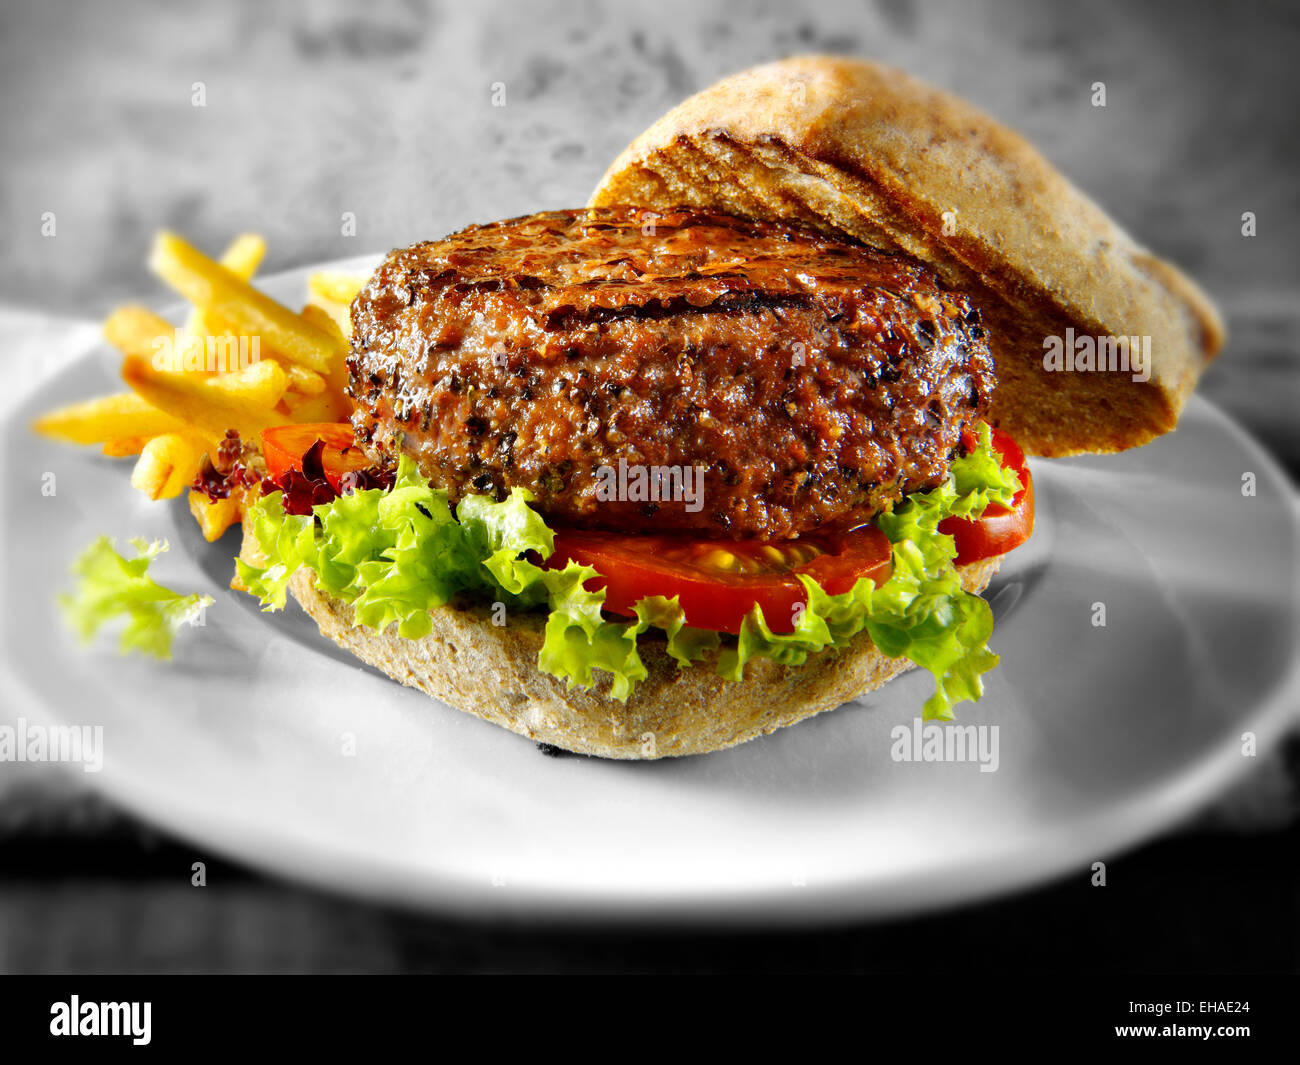 Beef burger with salad in a wholemeal bread bun and chips Stock Photo